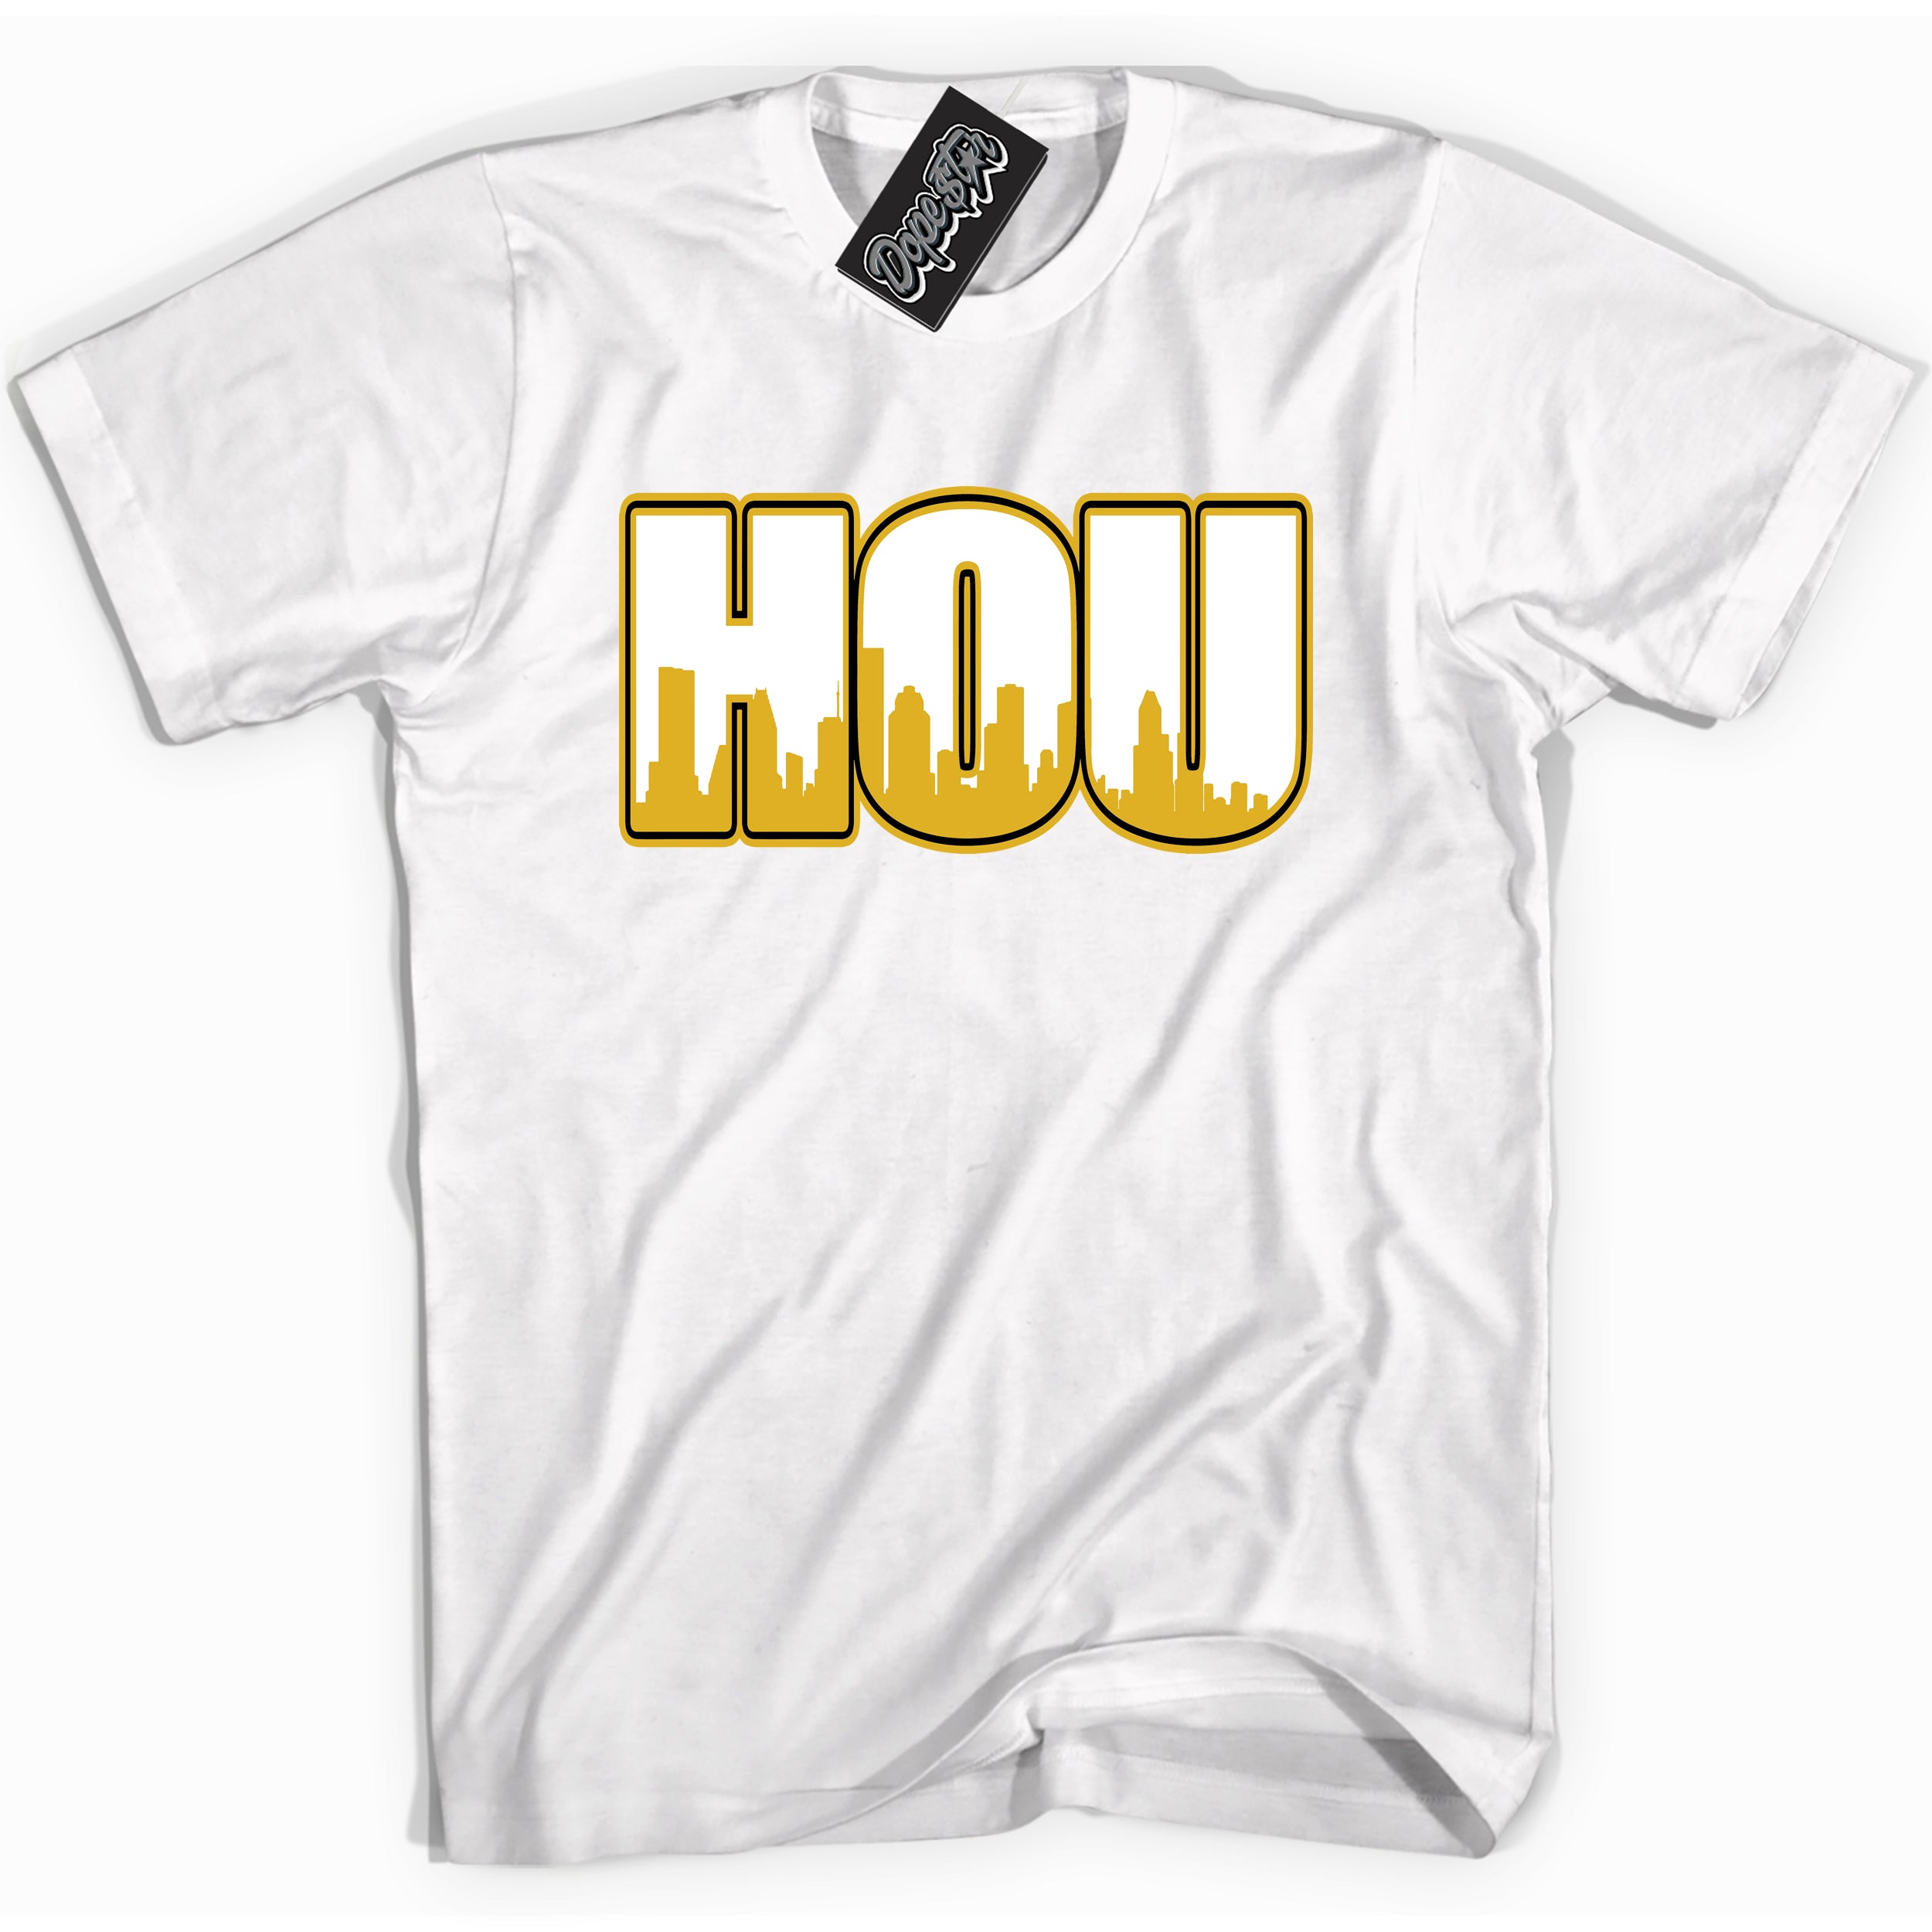 Cool White Shirt With Houston design That Perfectly Matches AIR JORDAN 6 RETRO YELLOW OCHRE Sneakers.